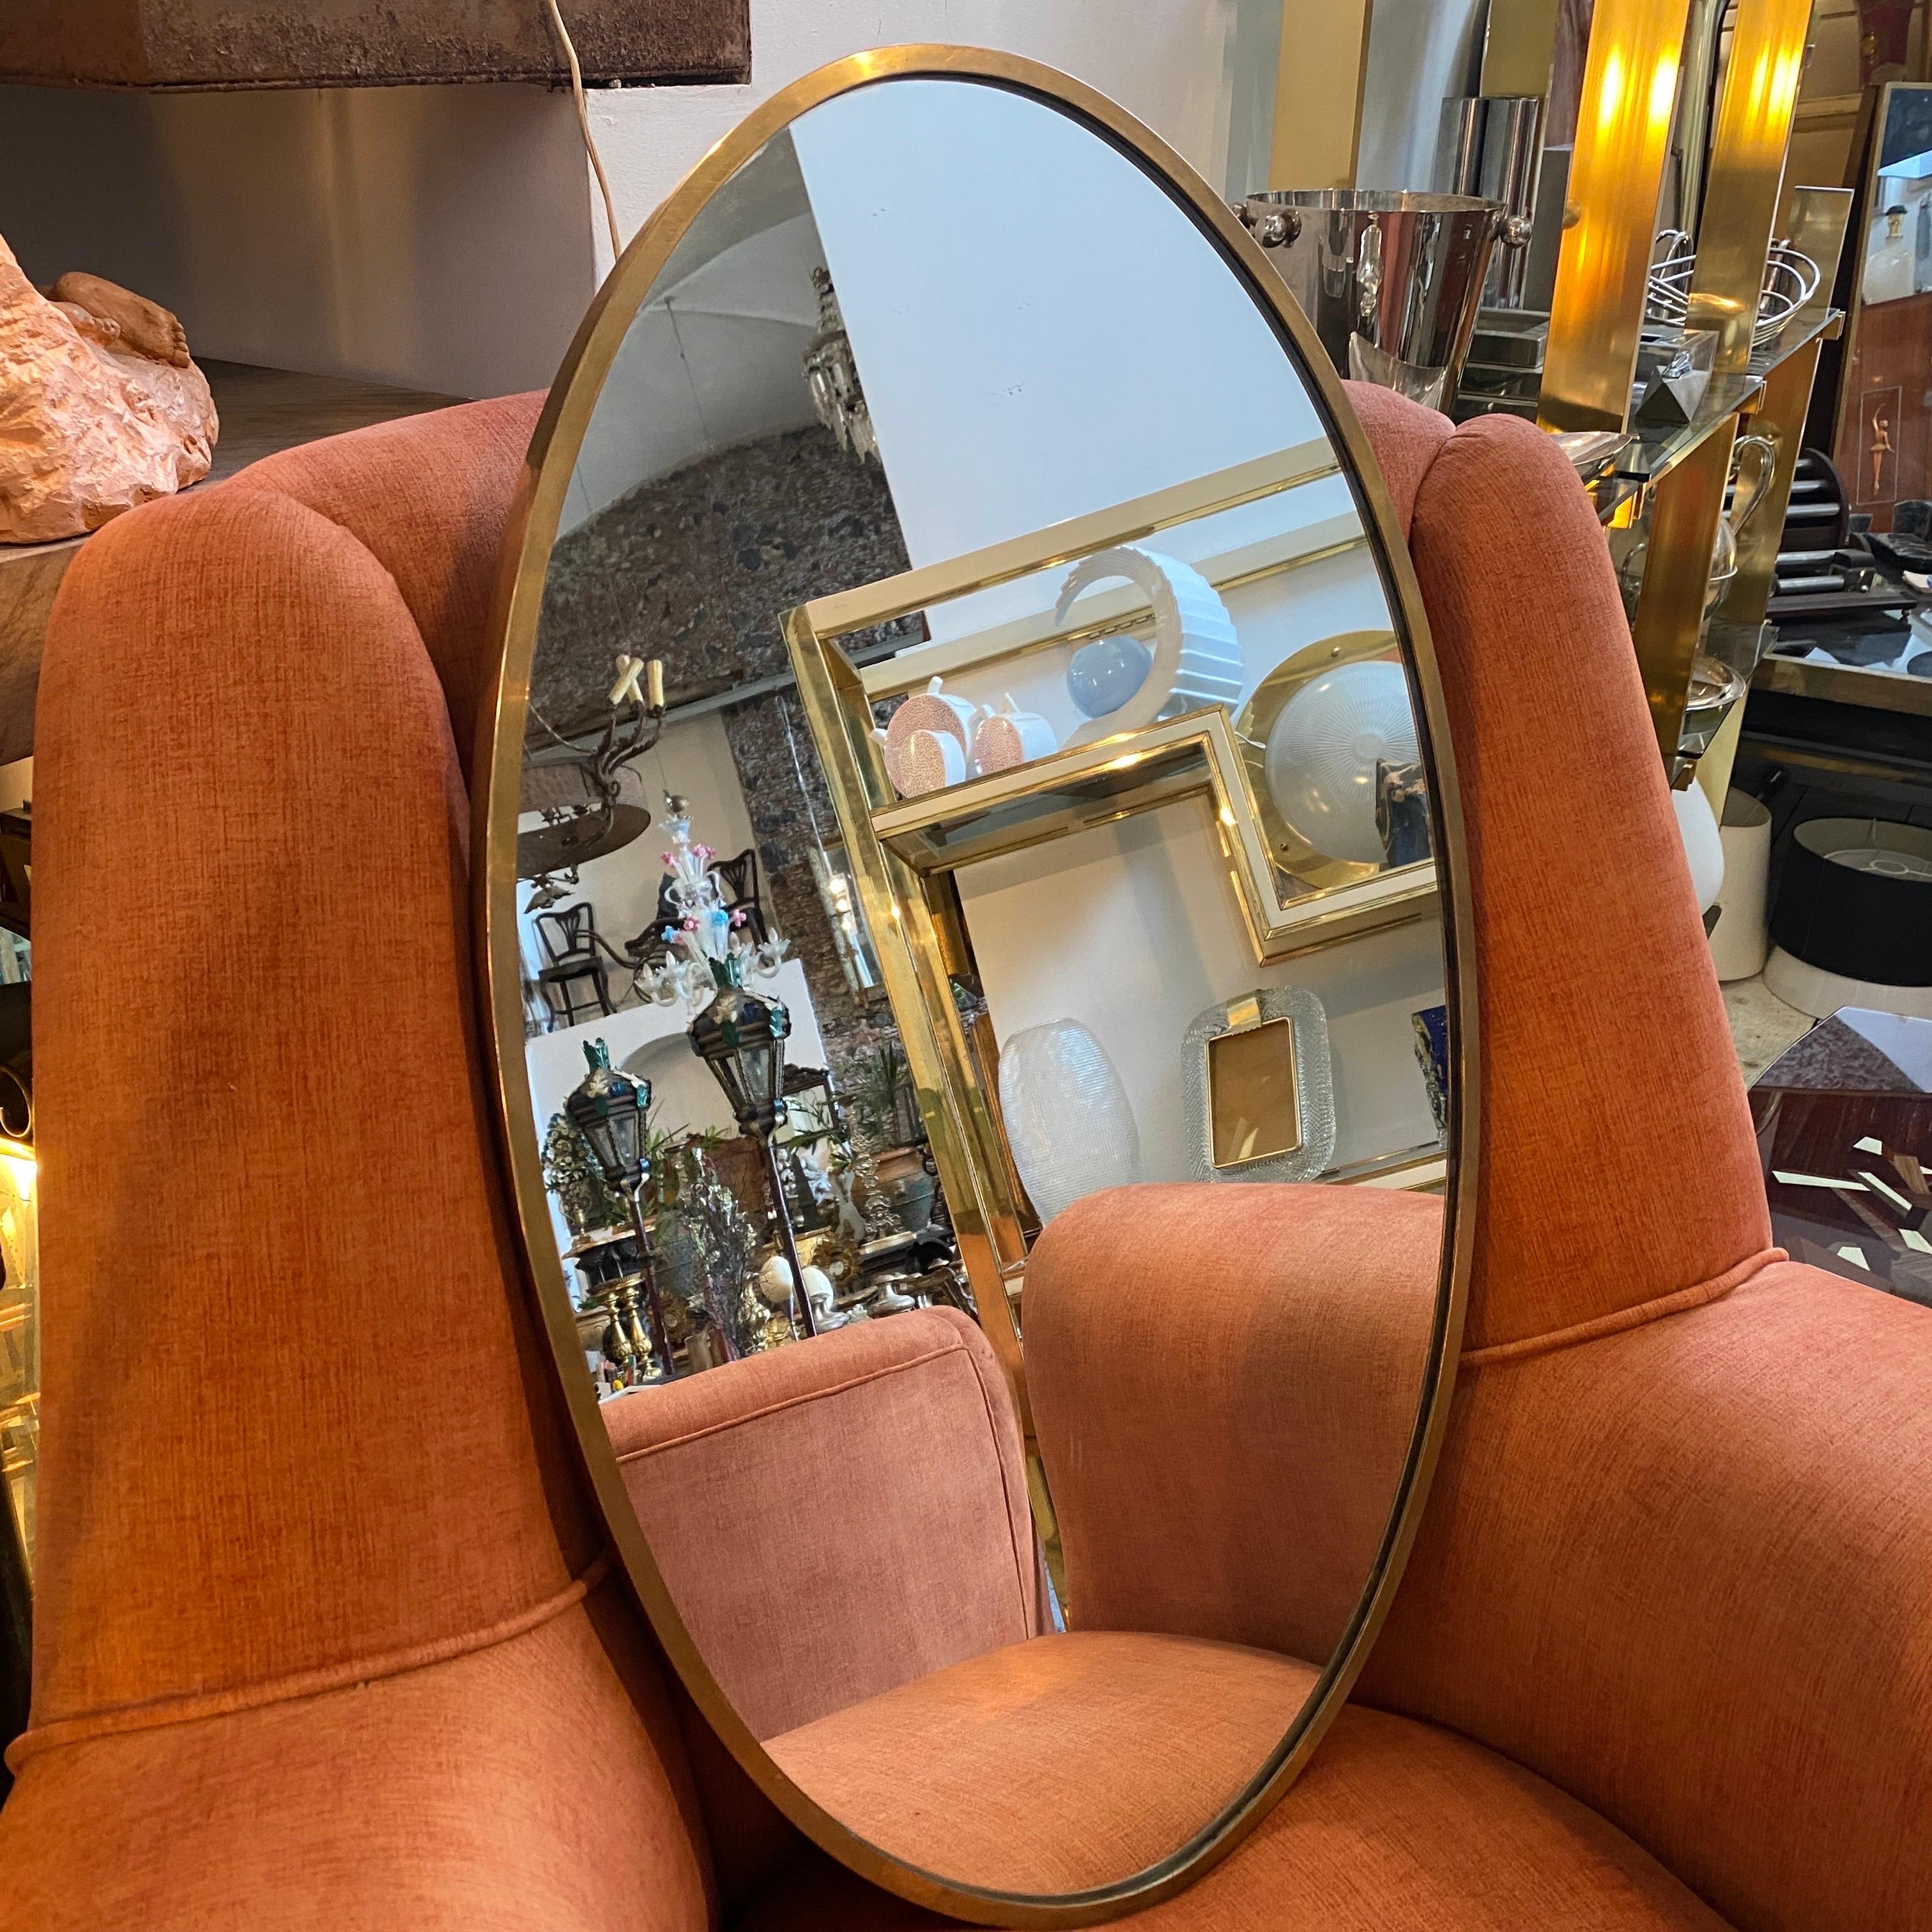 The 1950s was a period of great creativity and innovation in the world of design, and the Mid-Century Modern movement was at the forefront of this exciting time. This Solid Brass Italian Oval Wall Mirror is a stunning example of this design style